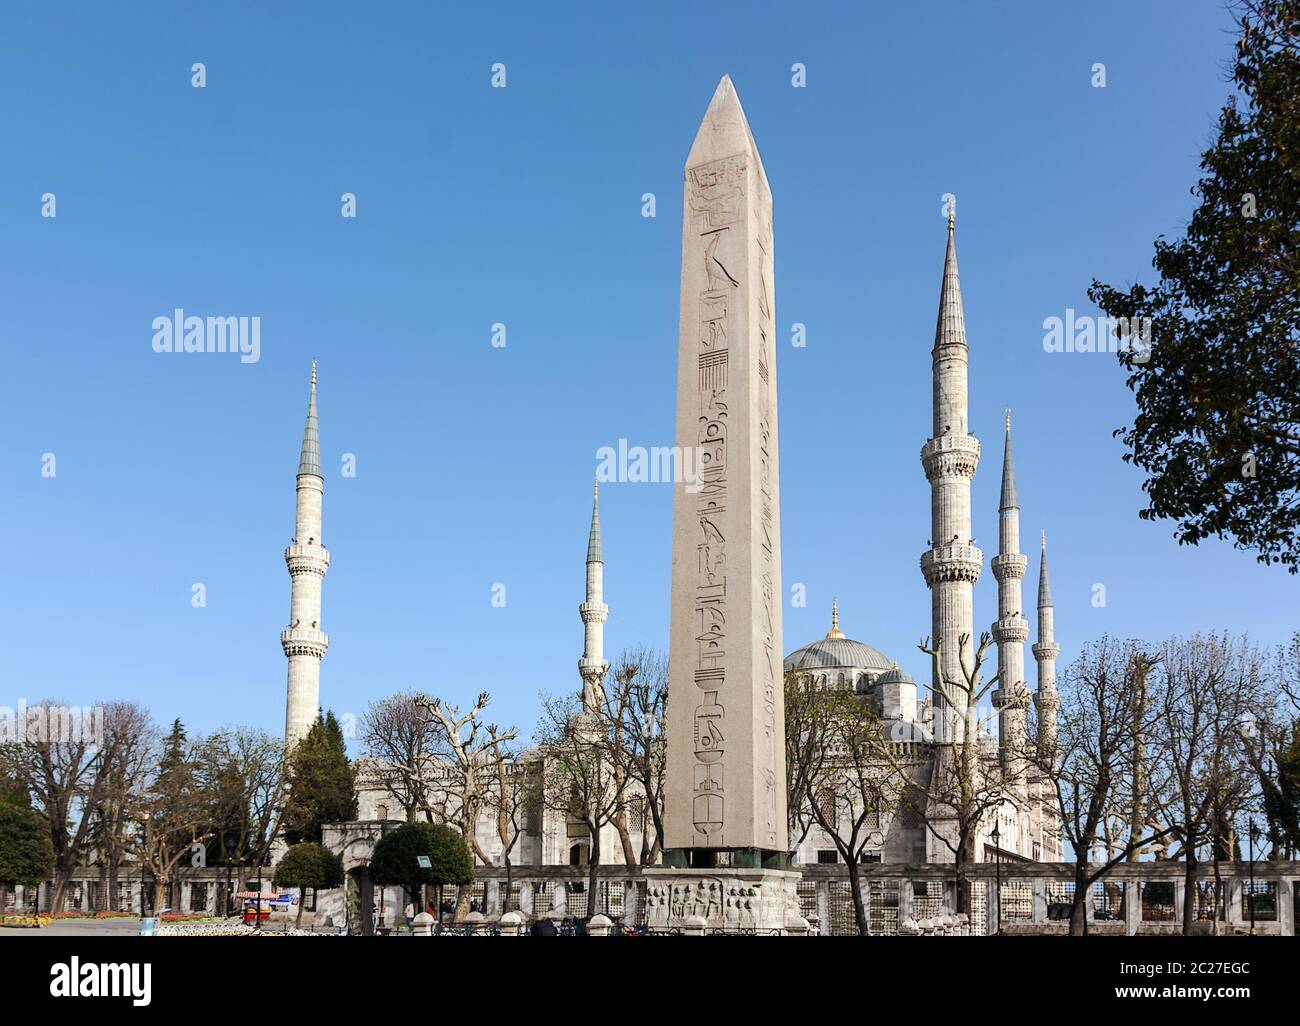 The place of Hippodrome, Istanbul Stock Photo